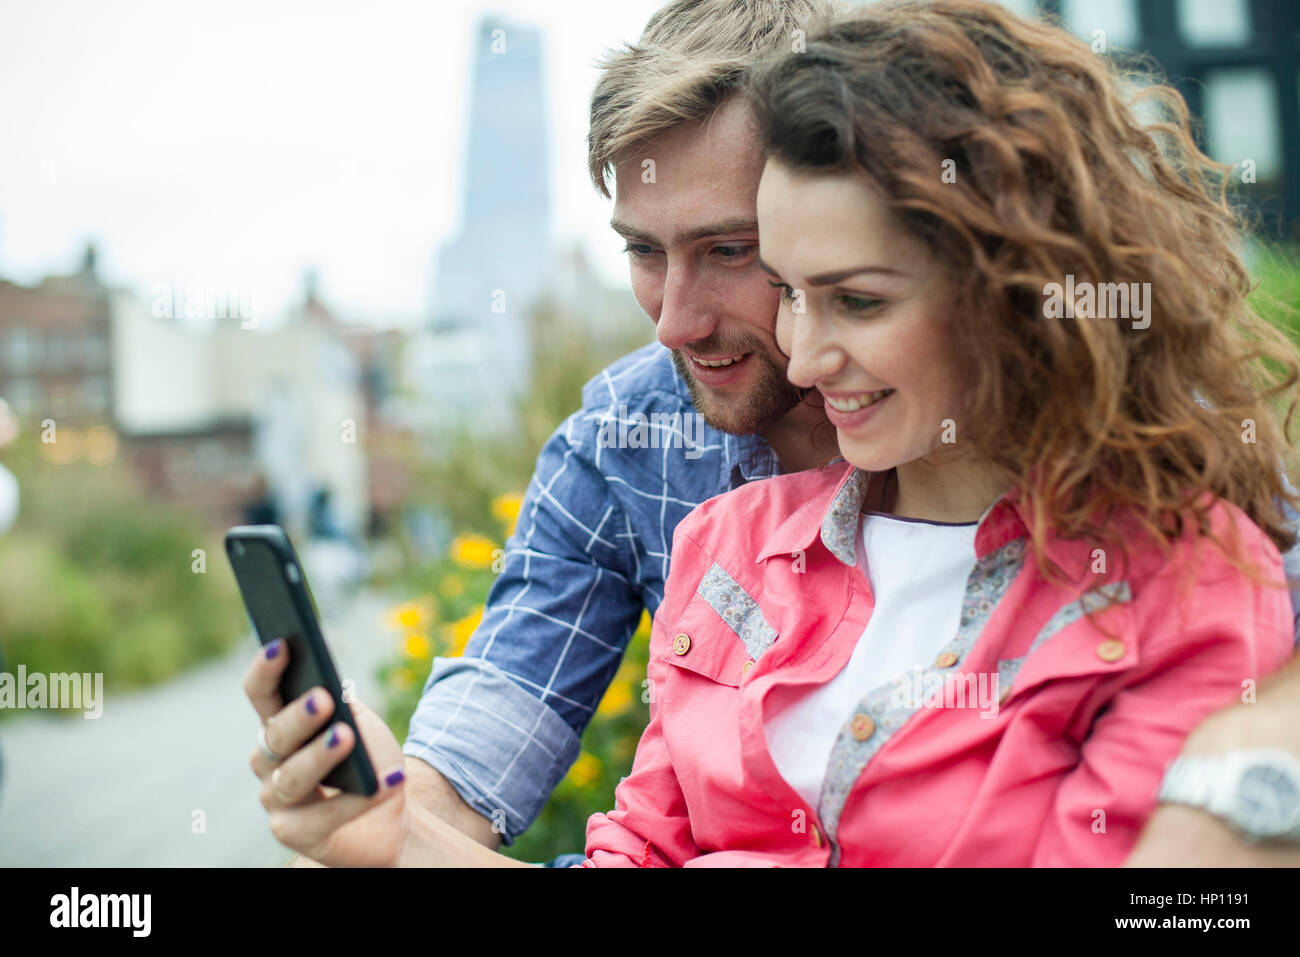 Couple looking at smartphone together outdoors Stock Photo